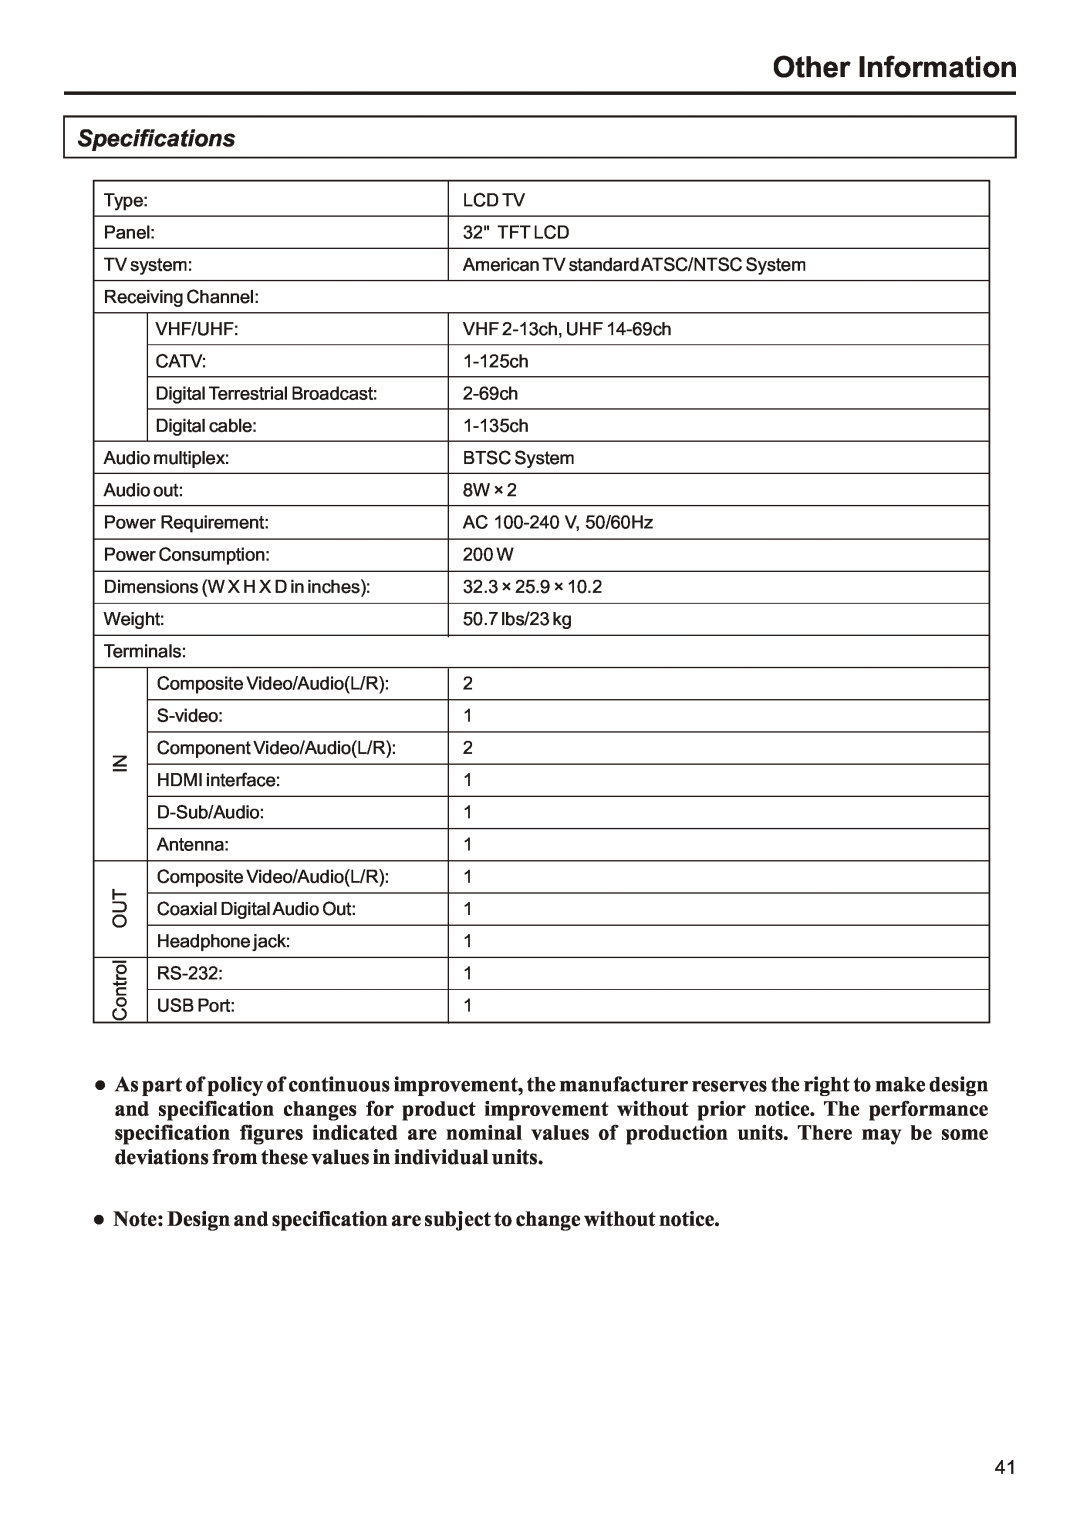 Audiovox FPE3207 operation manual Specifications, Other Information 